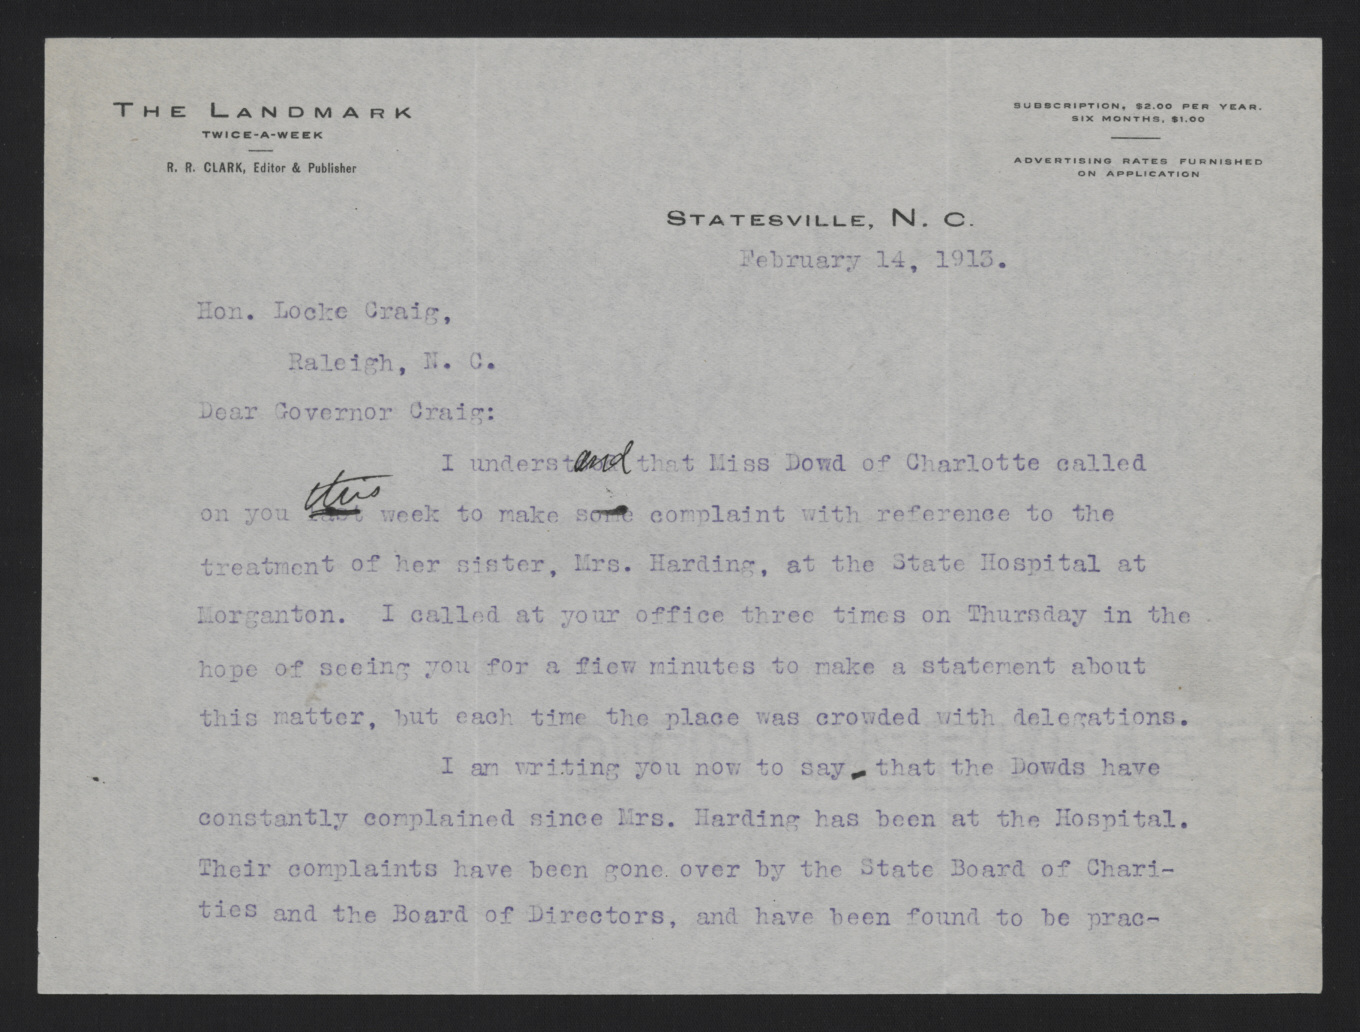 Letter from Clark to Craig, February 14, 1913, page 1